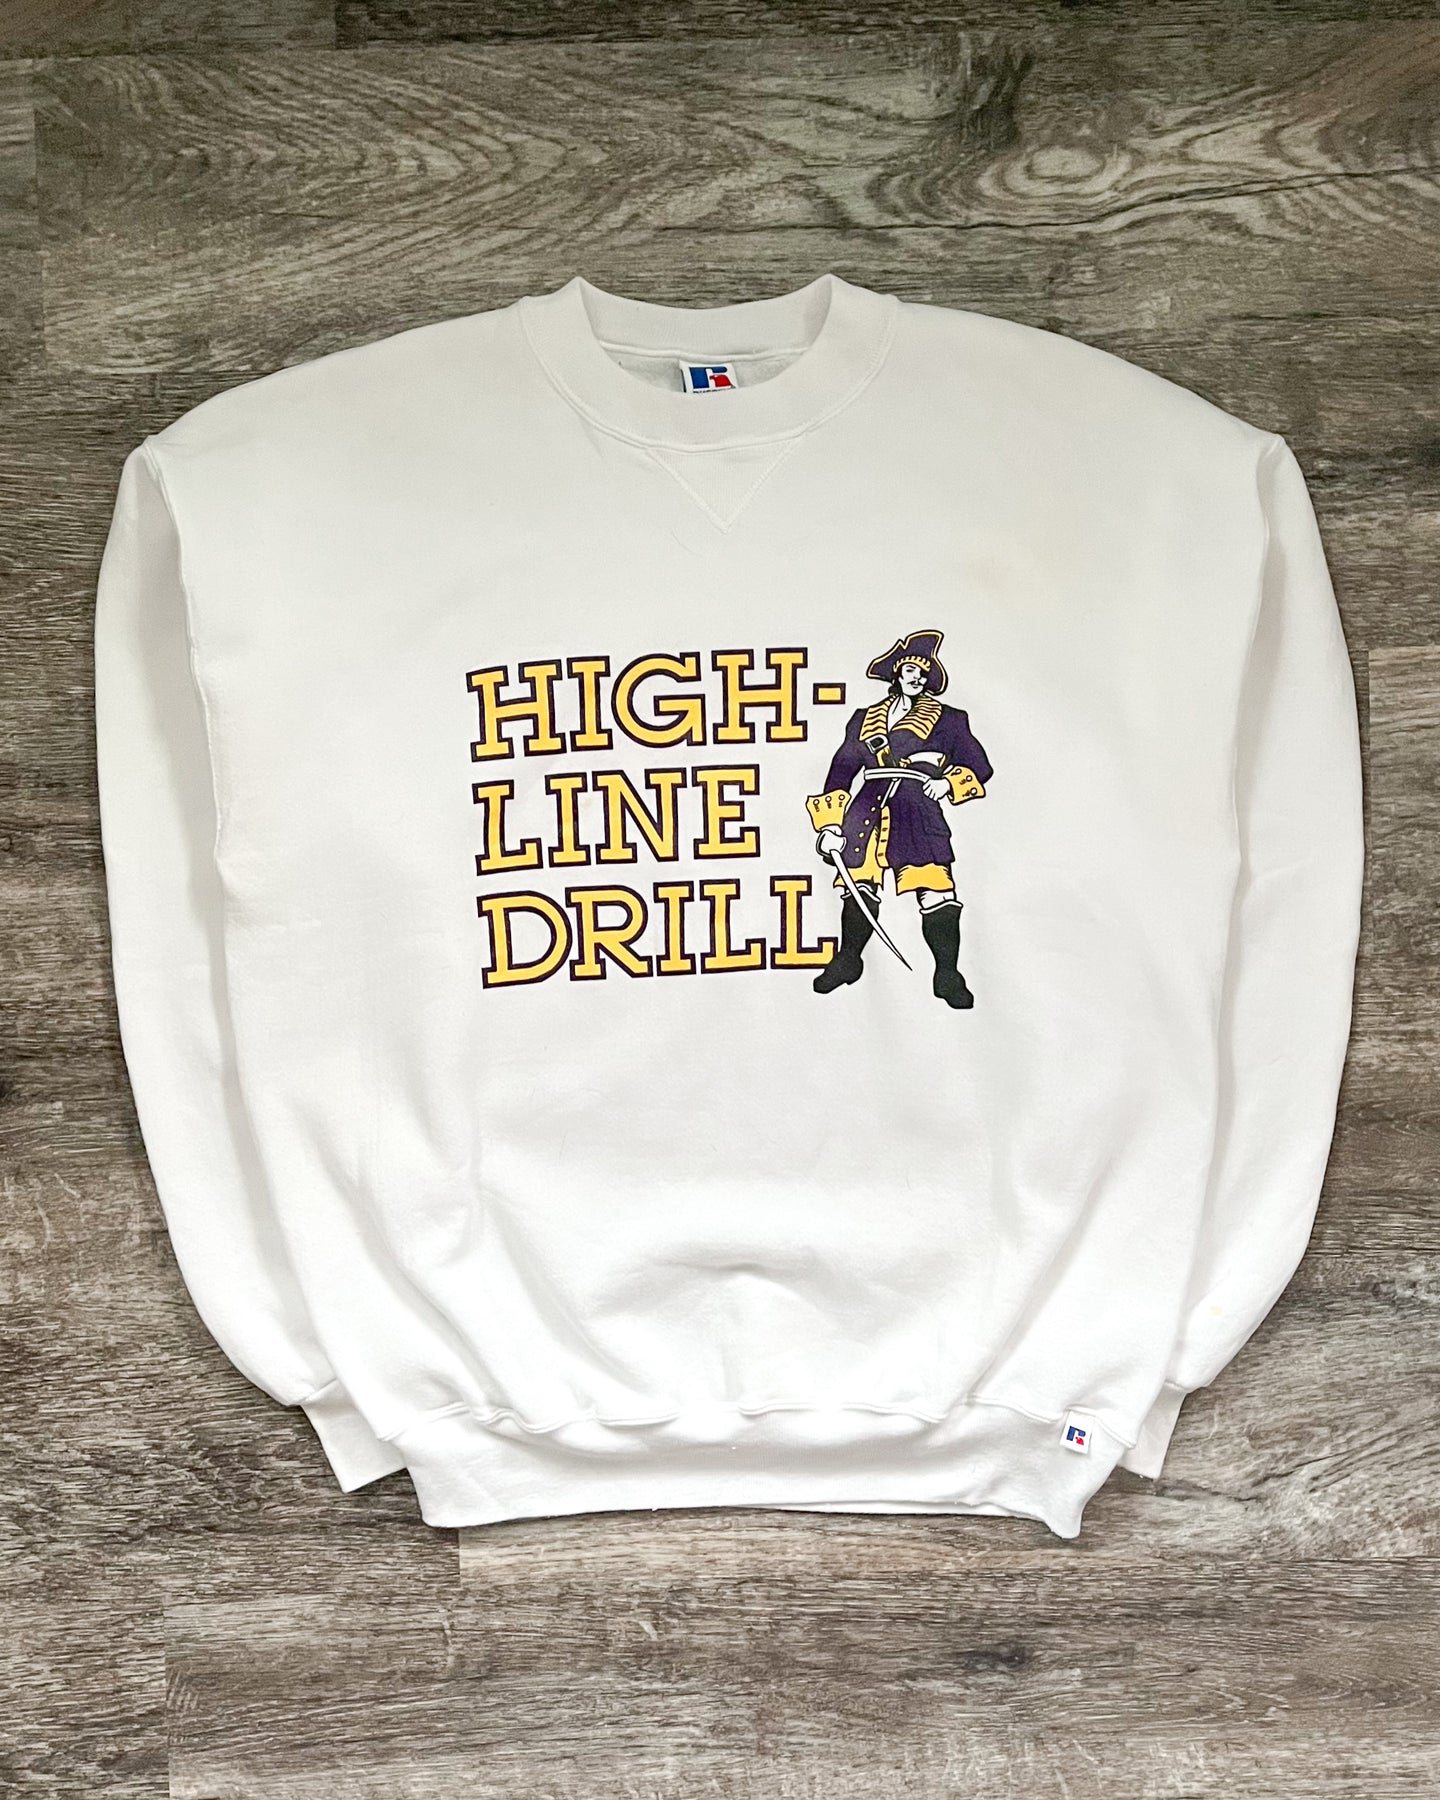 1990s Russell Athletic High Line Drill Crewneck Sweatshirt - Size Large